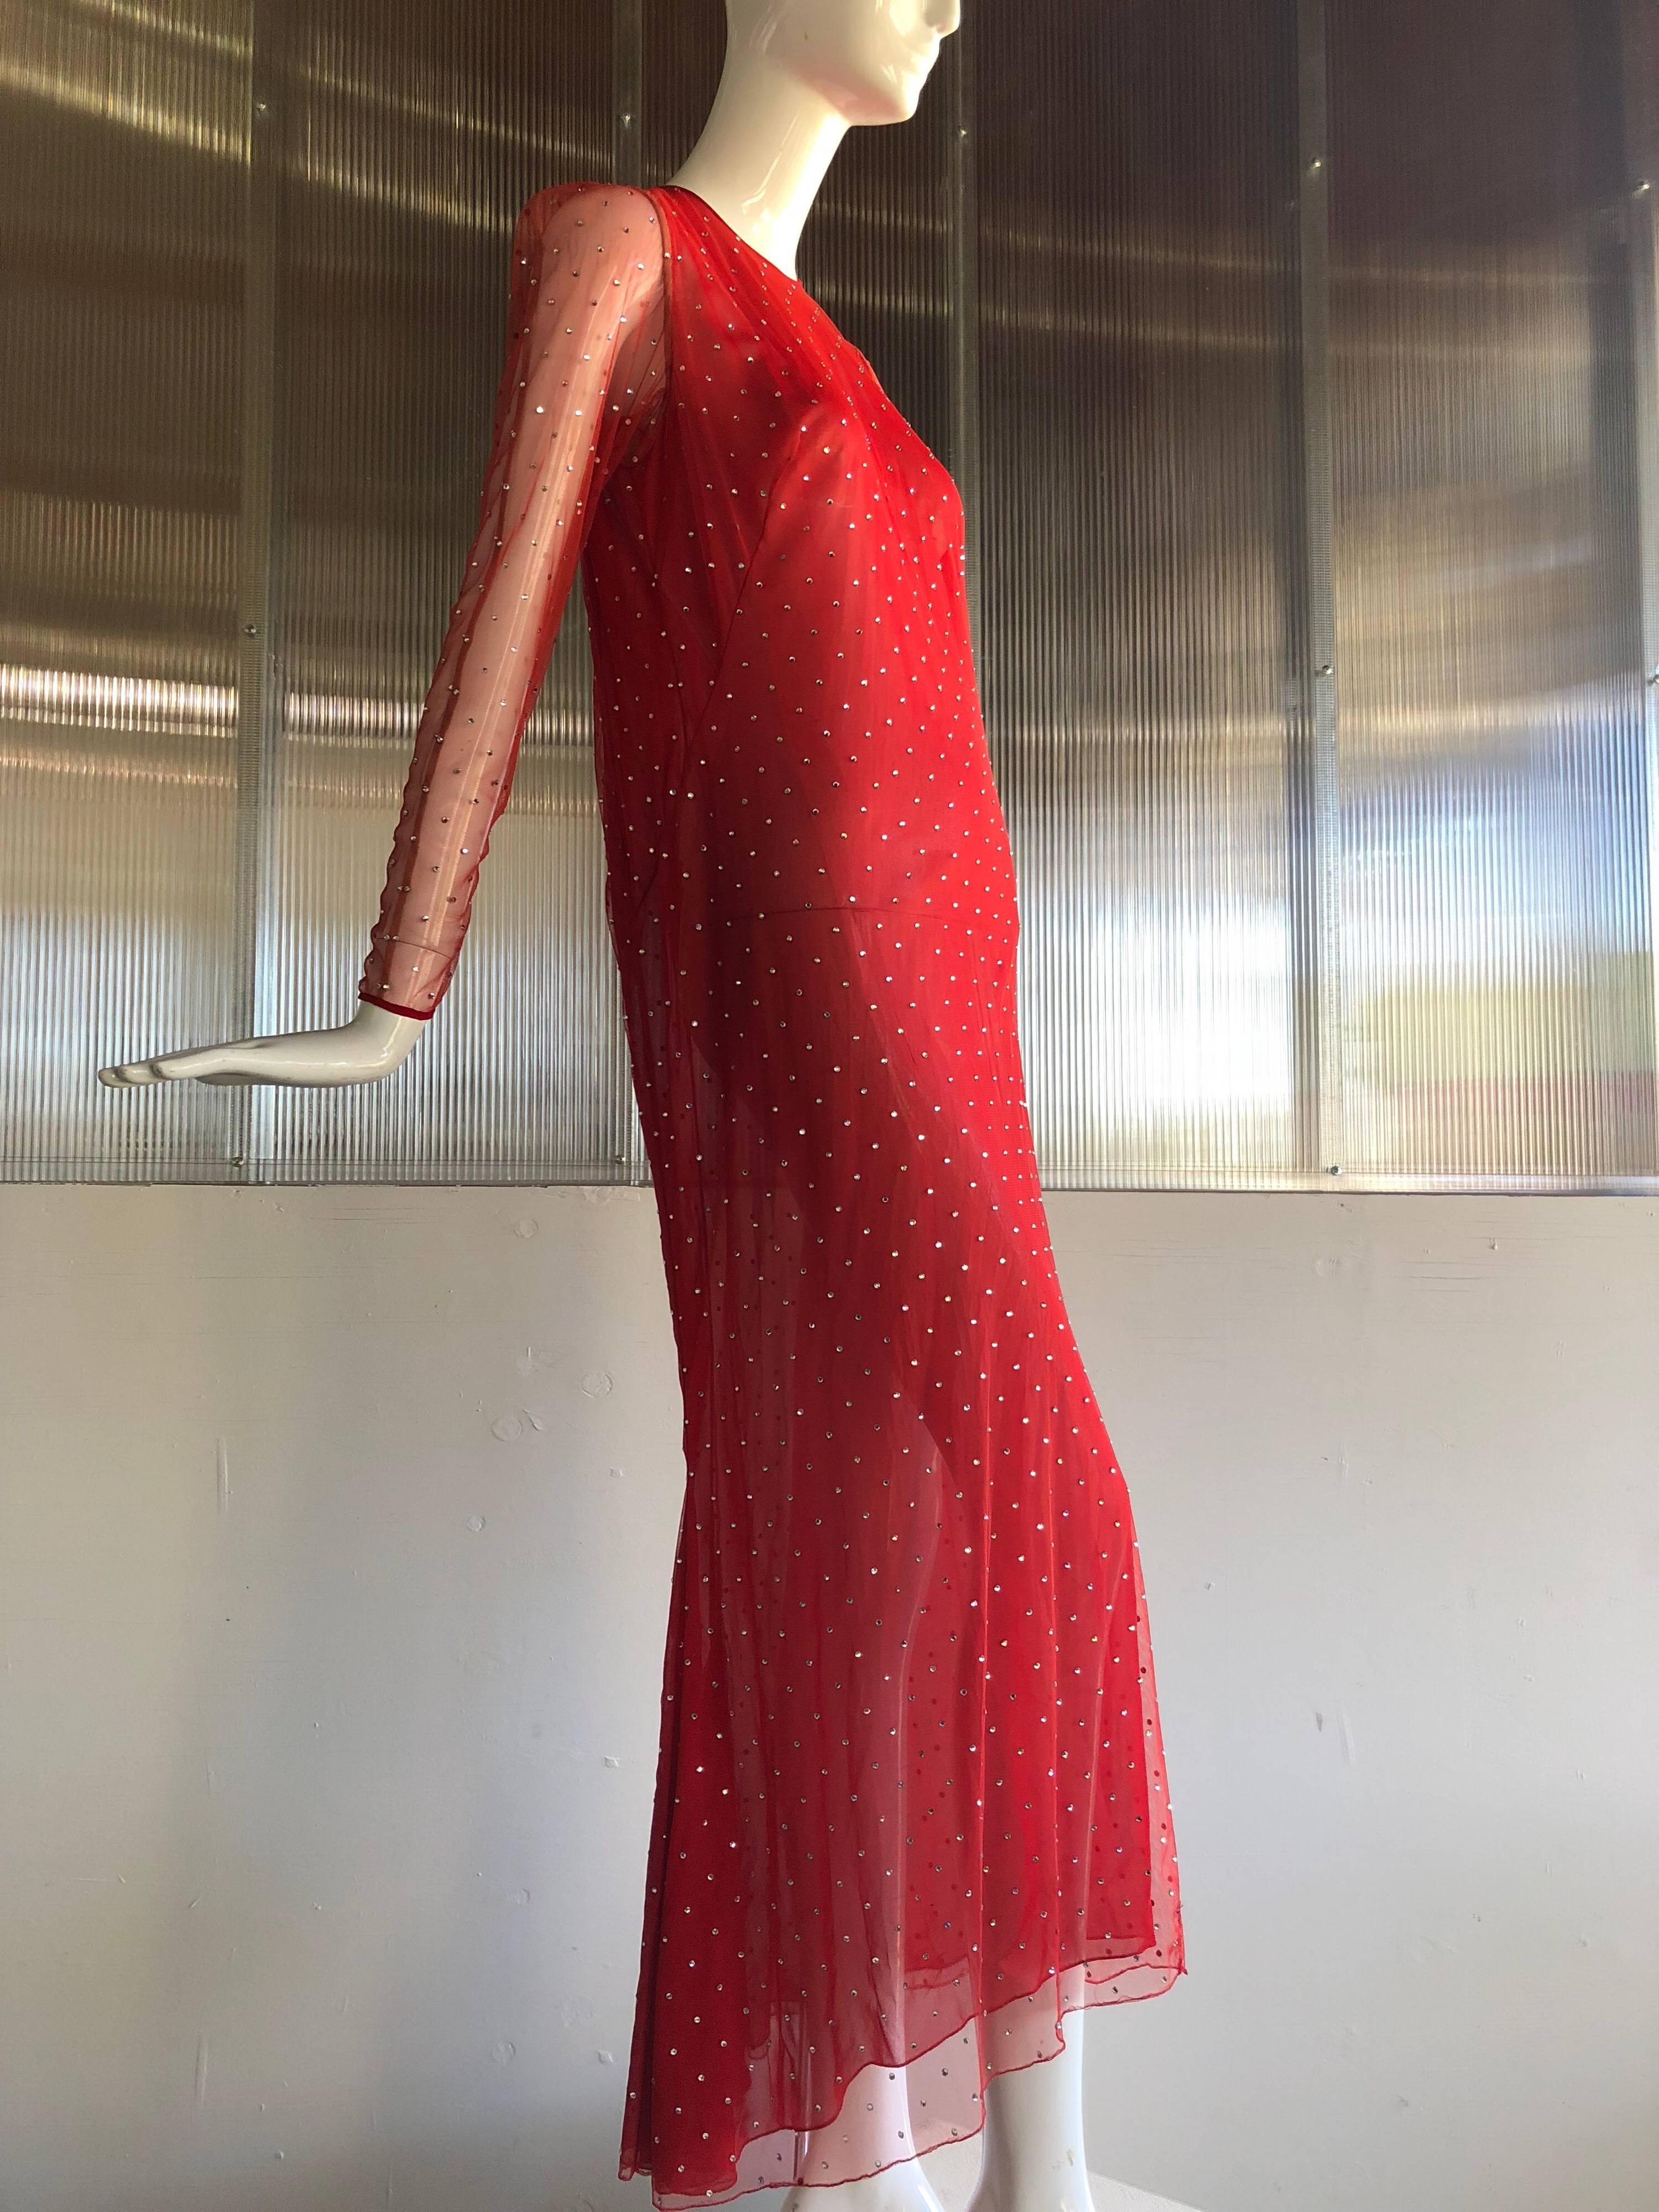 1980s Pauline Trigere Rhinestone Studded Red Net Evening Gown W/ Fishtail Hem In Excellent Condition For Sale In Gresham, OR